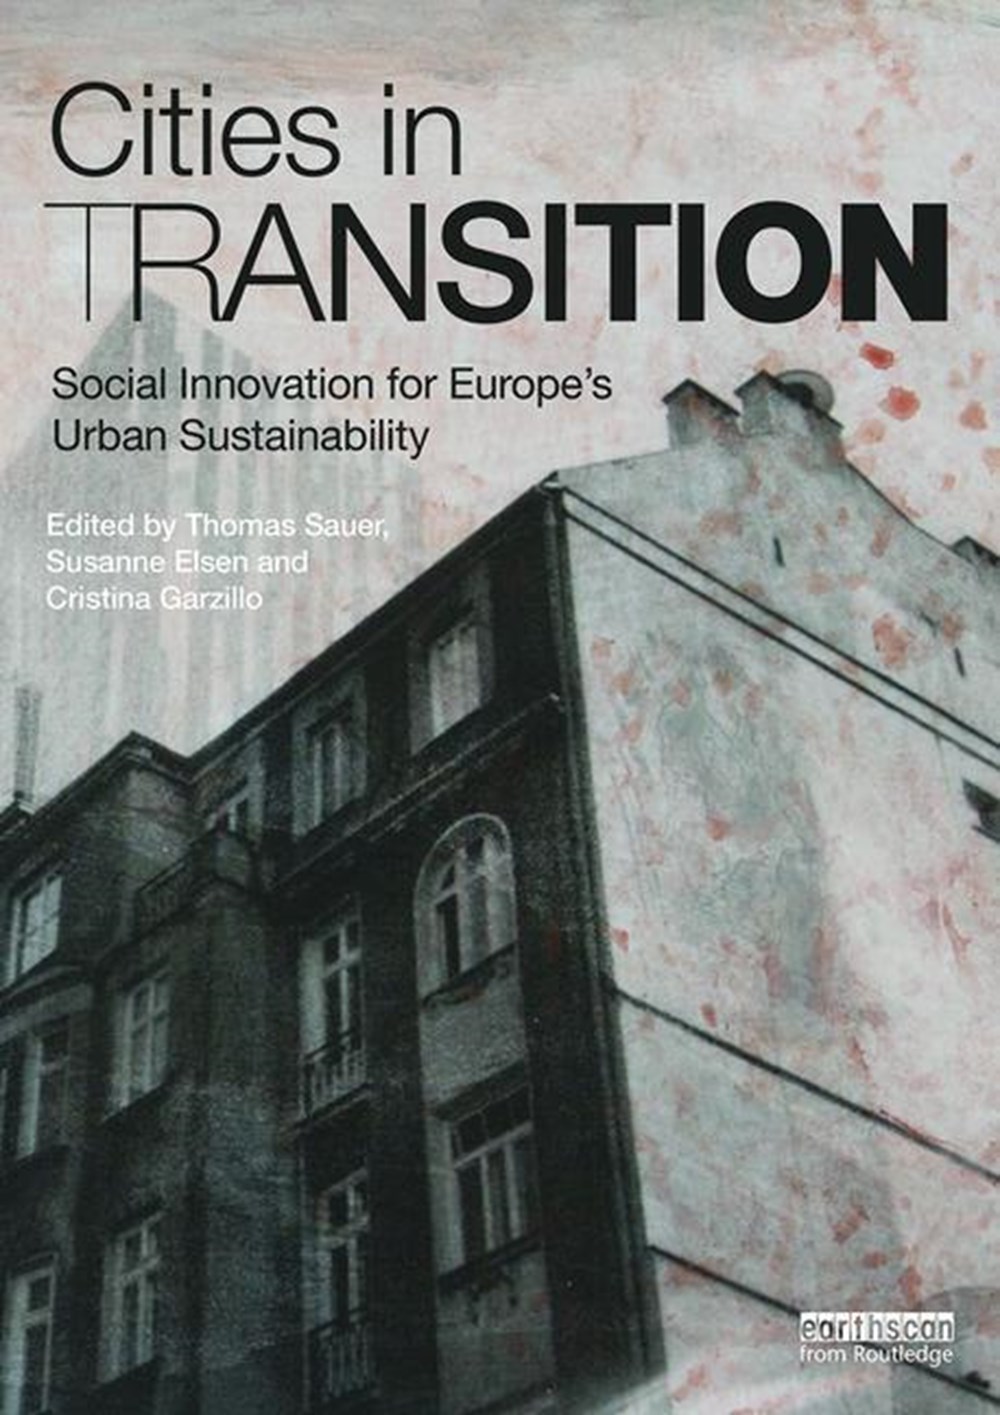 Cities in Transition: Social Innovation for Europe's Urban Sustainability